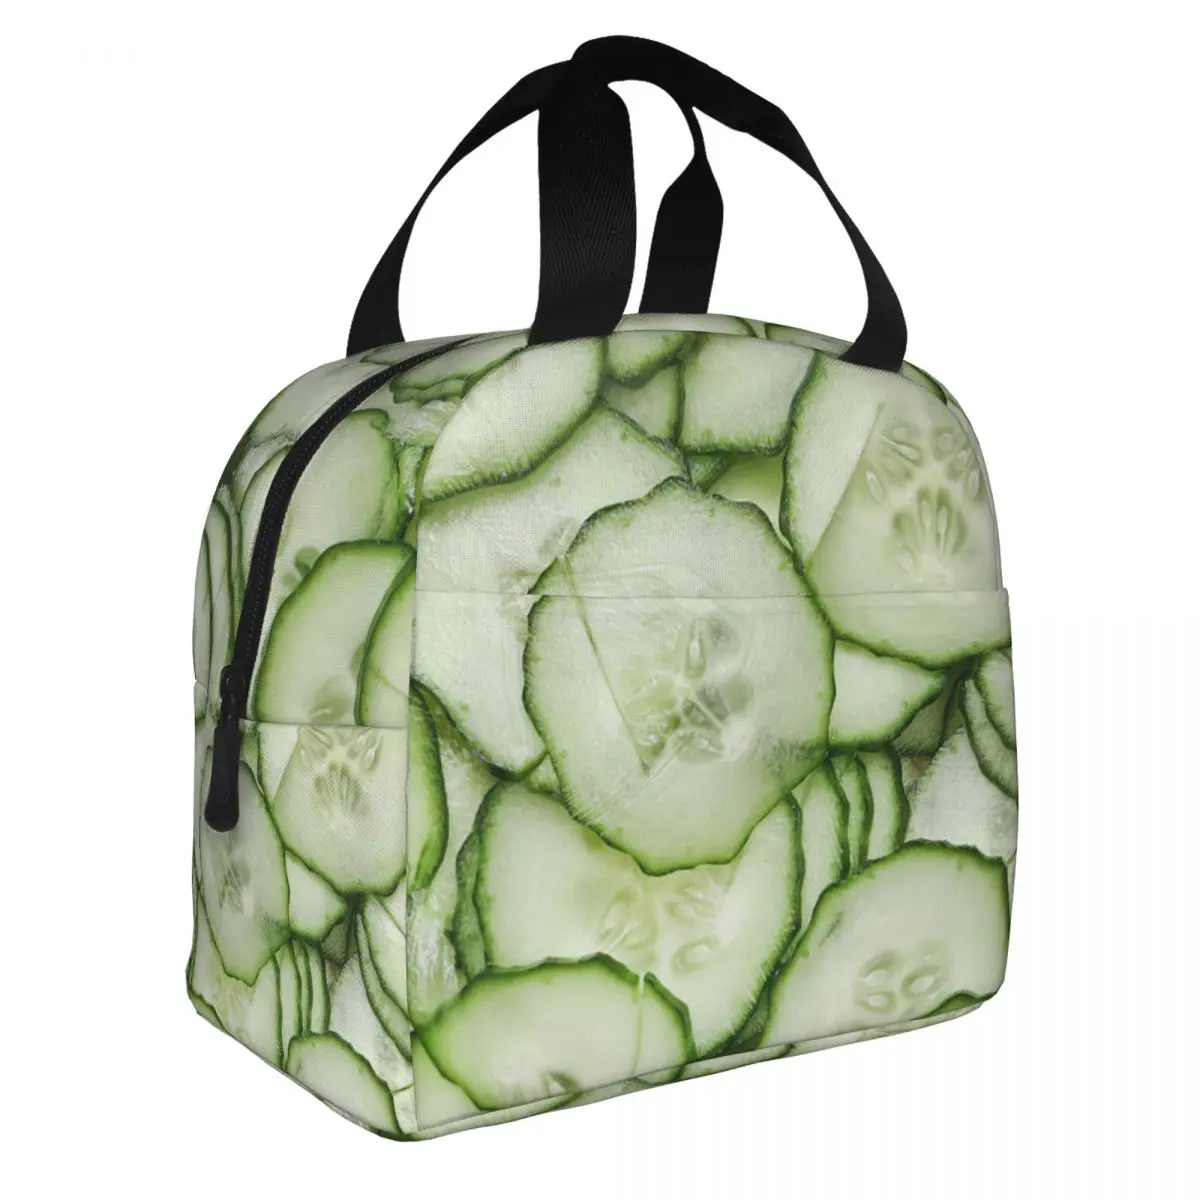 Cucumber Lunch Bento Bags Portable Aluminum Foil thickened Thermal Insulation Oxford Cloth Lunch Bag for Women Men Boy